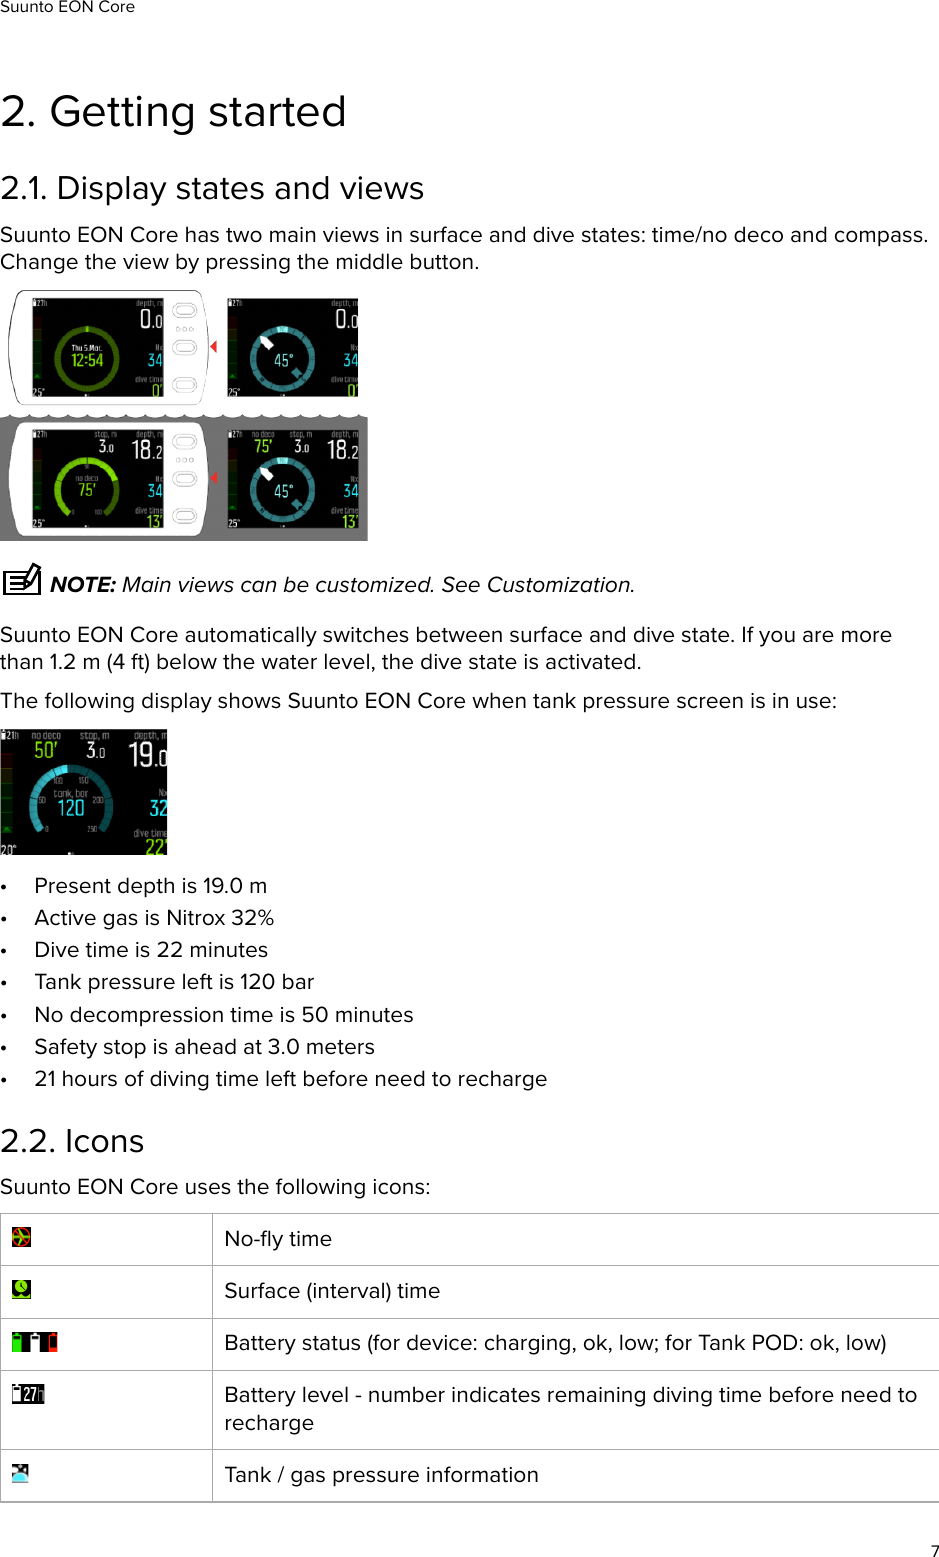 2. Getting started2.1. Display states and viewsSuunto EON Core has two main views in surface and dive states: time/no deco and compass.Change the view by pressing the middle button. NOTE: Main views can be customized. See Customization.Suunto EON Core automatically switches between surface and dive state. If you are morethan 1.2 m (4 ft) below the water level, the dive state is activated.The following display shows Suunto EON Core when tank pressure screen is in use:•Present depth is 19.0 m•Active gas is Nitrox 32%•Dive time is 22 minutes•Tank pressure left is 120 bar•No decompression time is 50 minutes•Safety stop is ahead at 3.0 meters•21 hours of diving time left before need to recharge2.2. IconsSuunto EON Core uses the following icons:No-ﬂy timeSurface (interval) timeBattery status (for device: charging, ok, low; for Tank POD: ok, low)Battery level - number indicates remaining diving time before need torechargeTank / gas pressure informationSuunto EON Core7